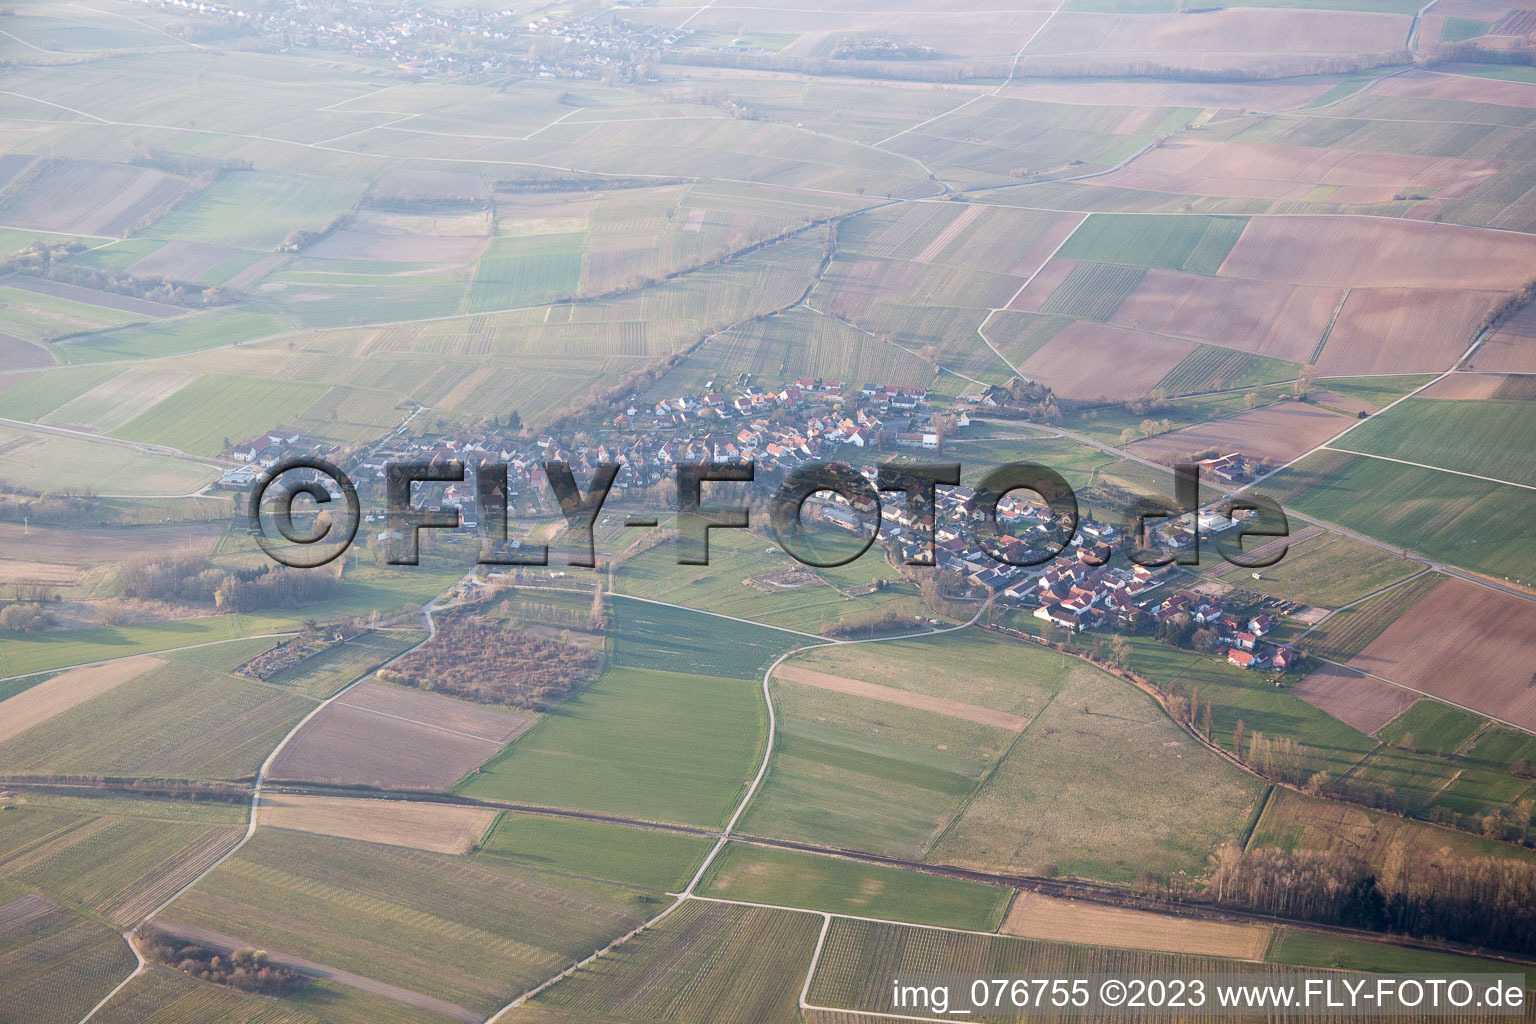 Aerial photograpy of Oberhausen in the state Rhineland-Palatinate, Germany